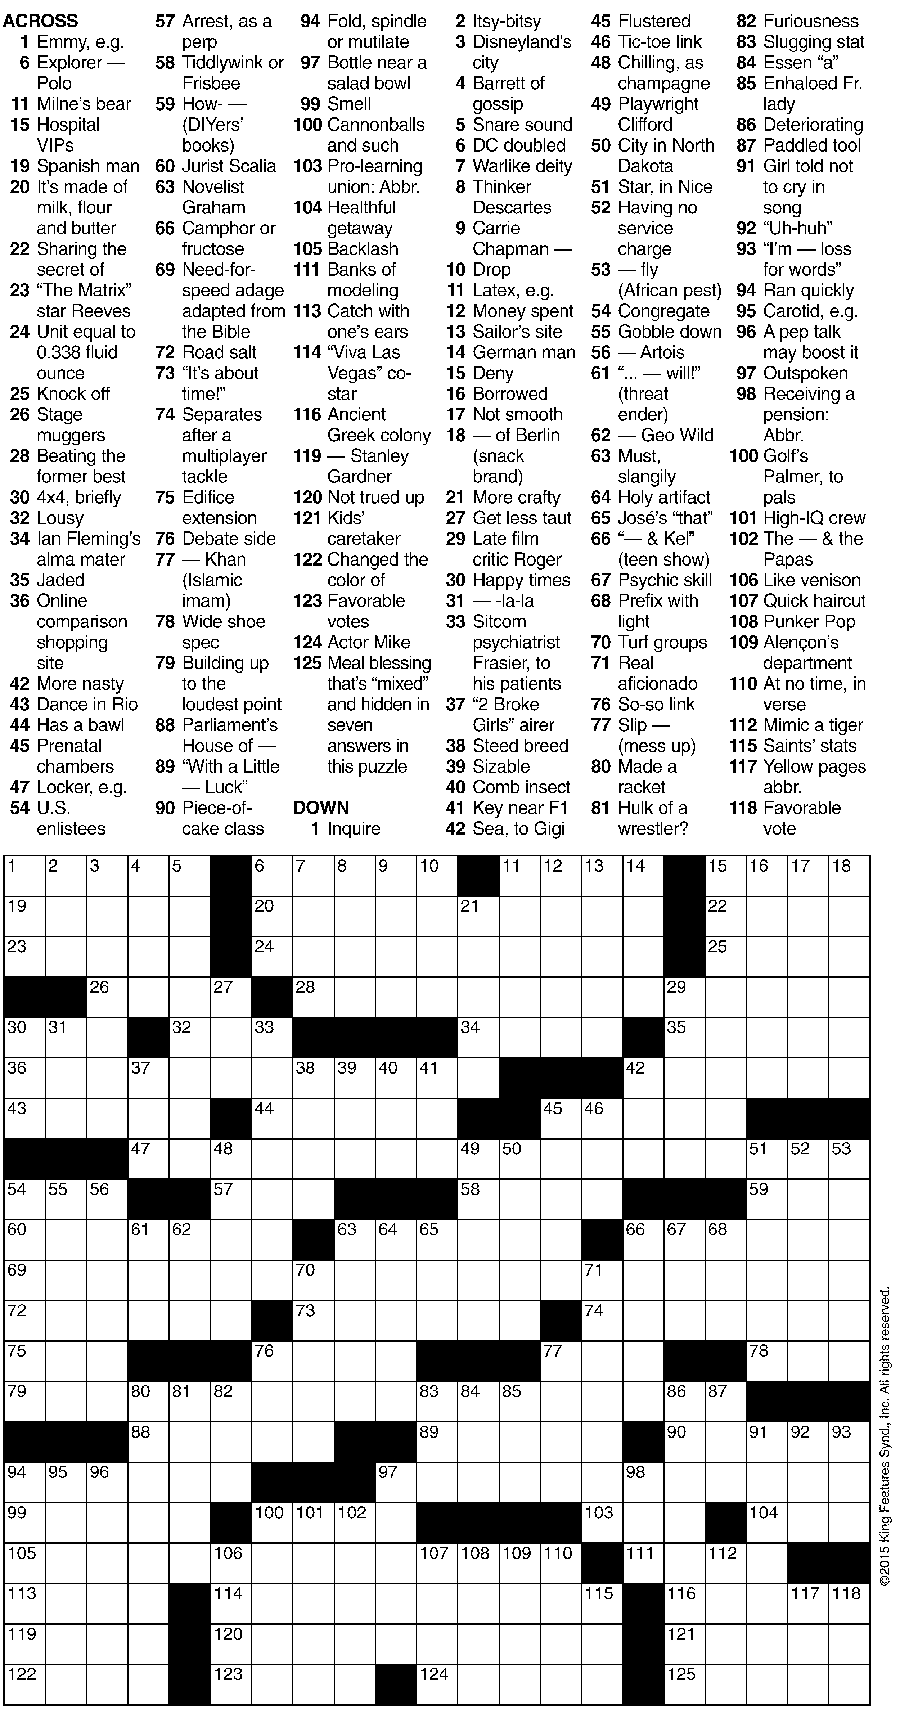 crossword_answer.png